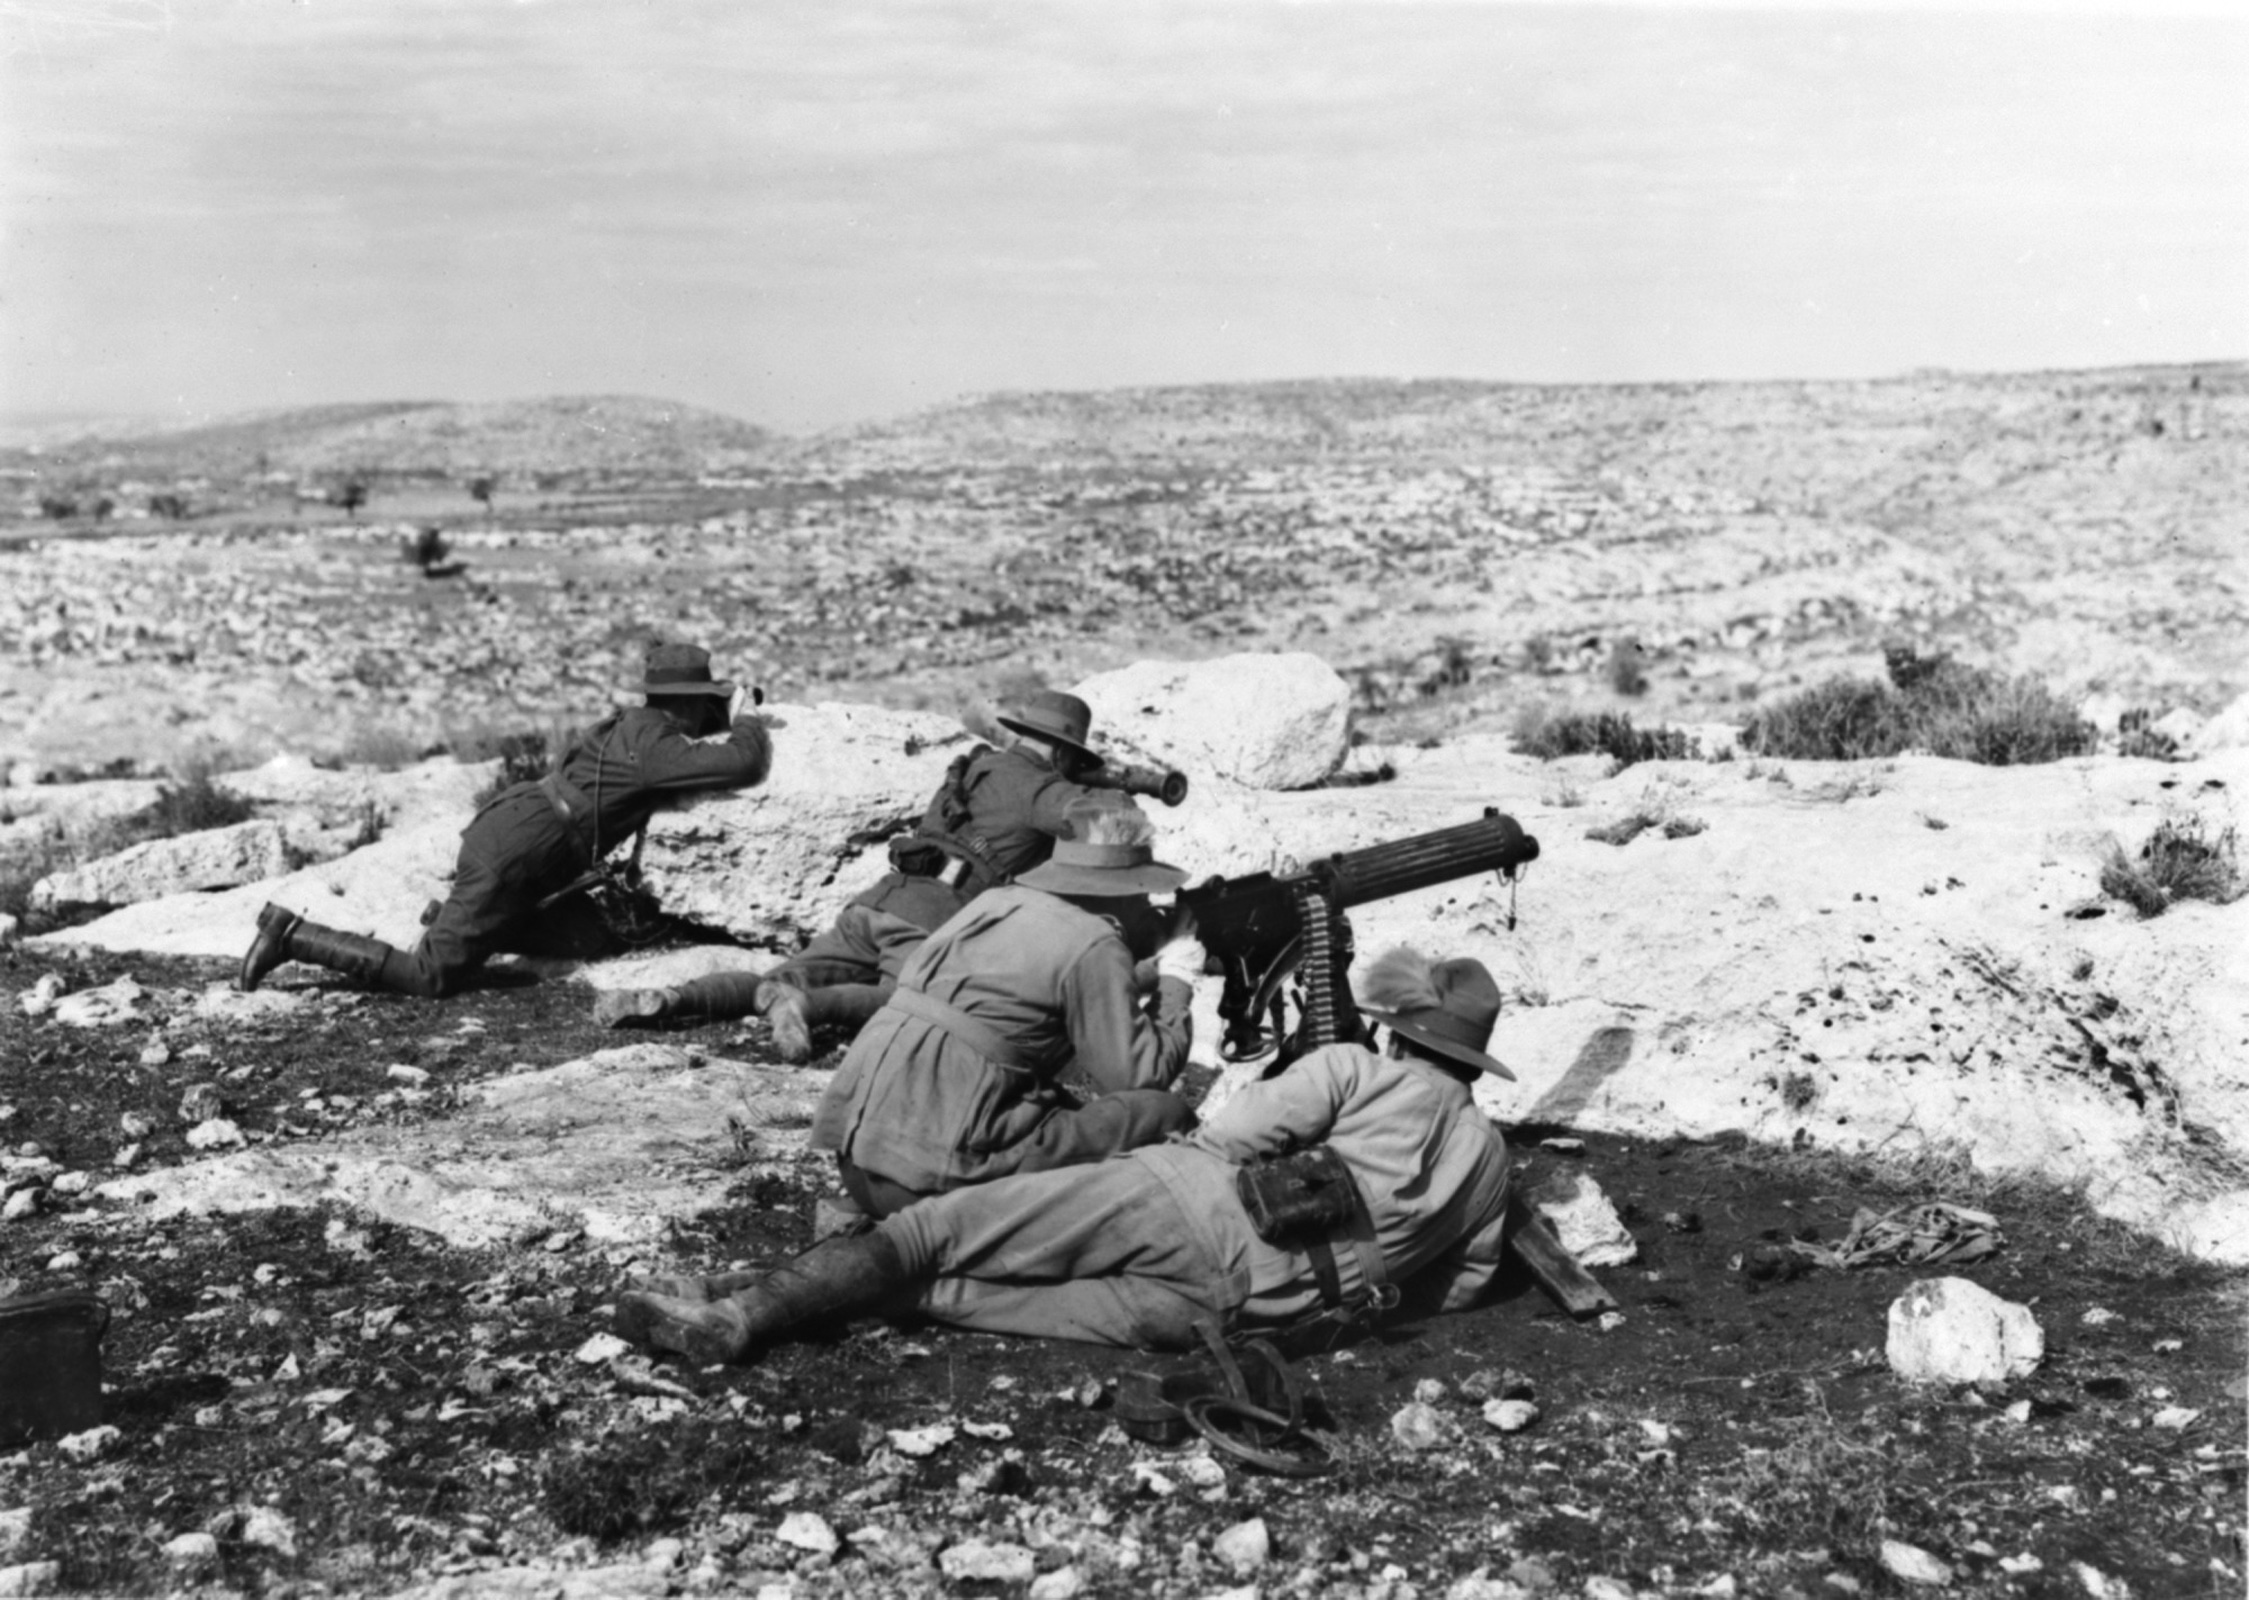 <p>Four unidentified members of the 3rd Australian Light Horse Regiment and machine gun in action at Khurbetha-Ibn-Harith, 31 December 1917</p>
